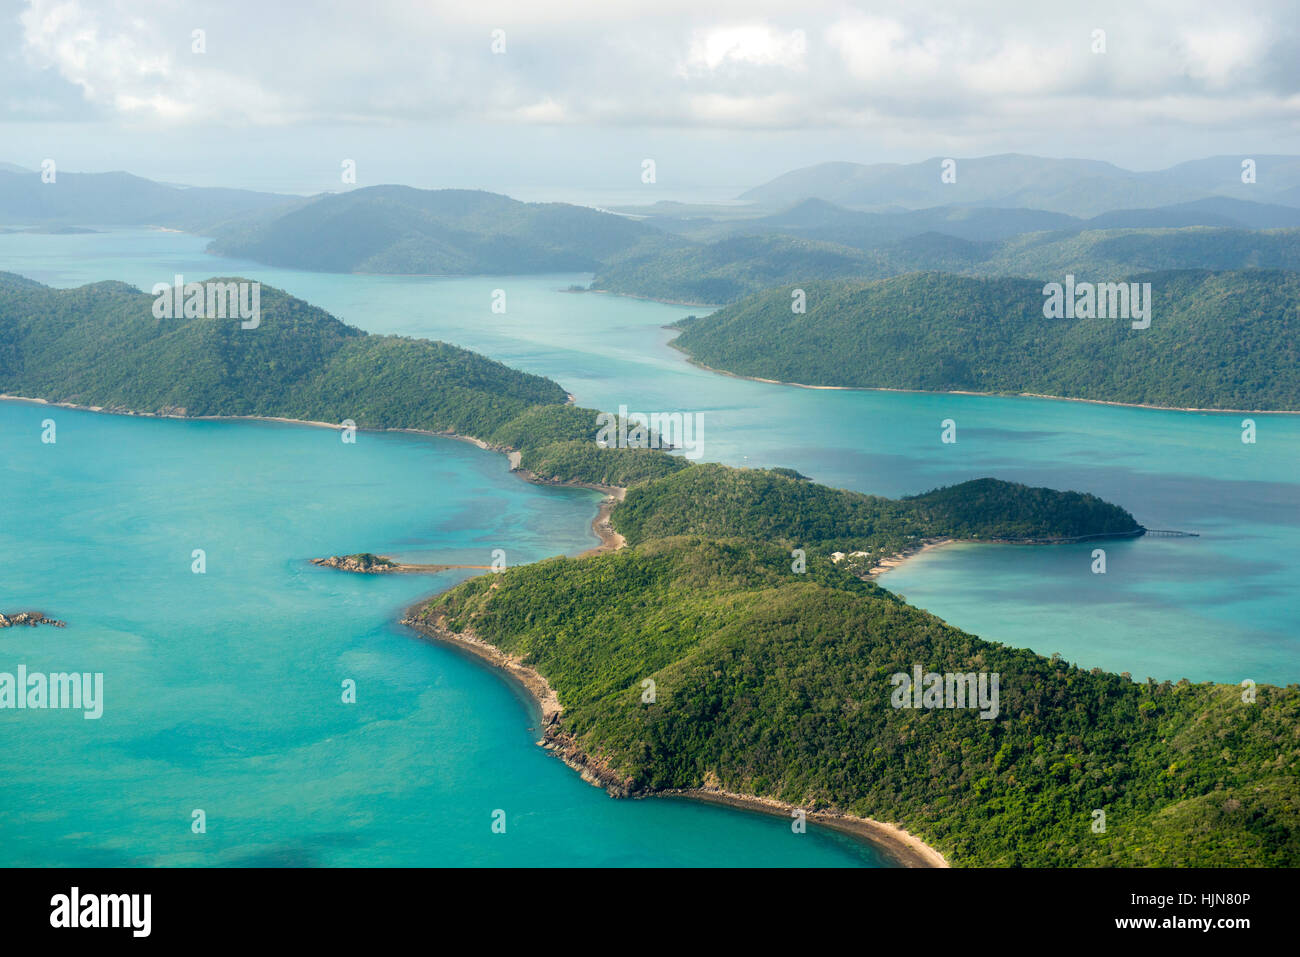 Aerial view of the Whitsunday Islands, taken from a light aircraft scenic flight, Queensland Australia Stock Photo